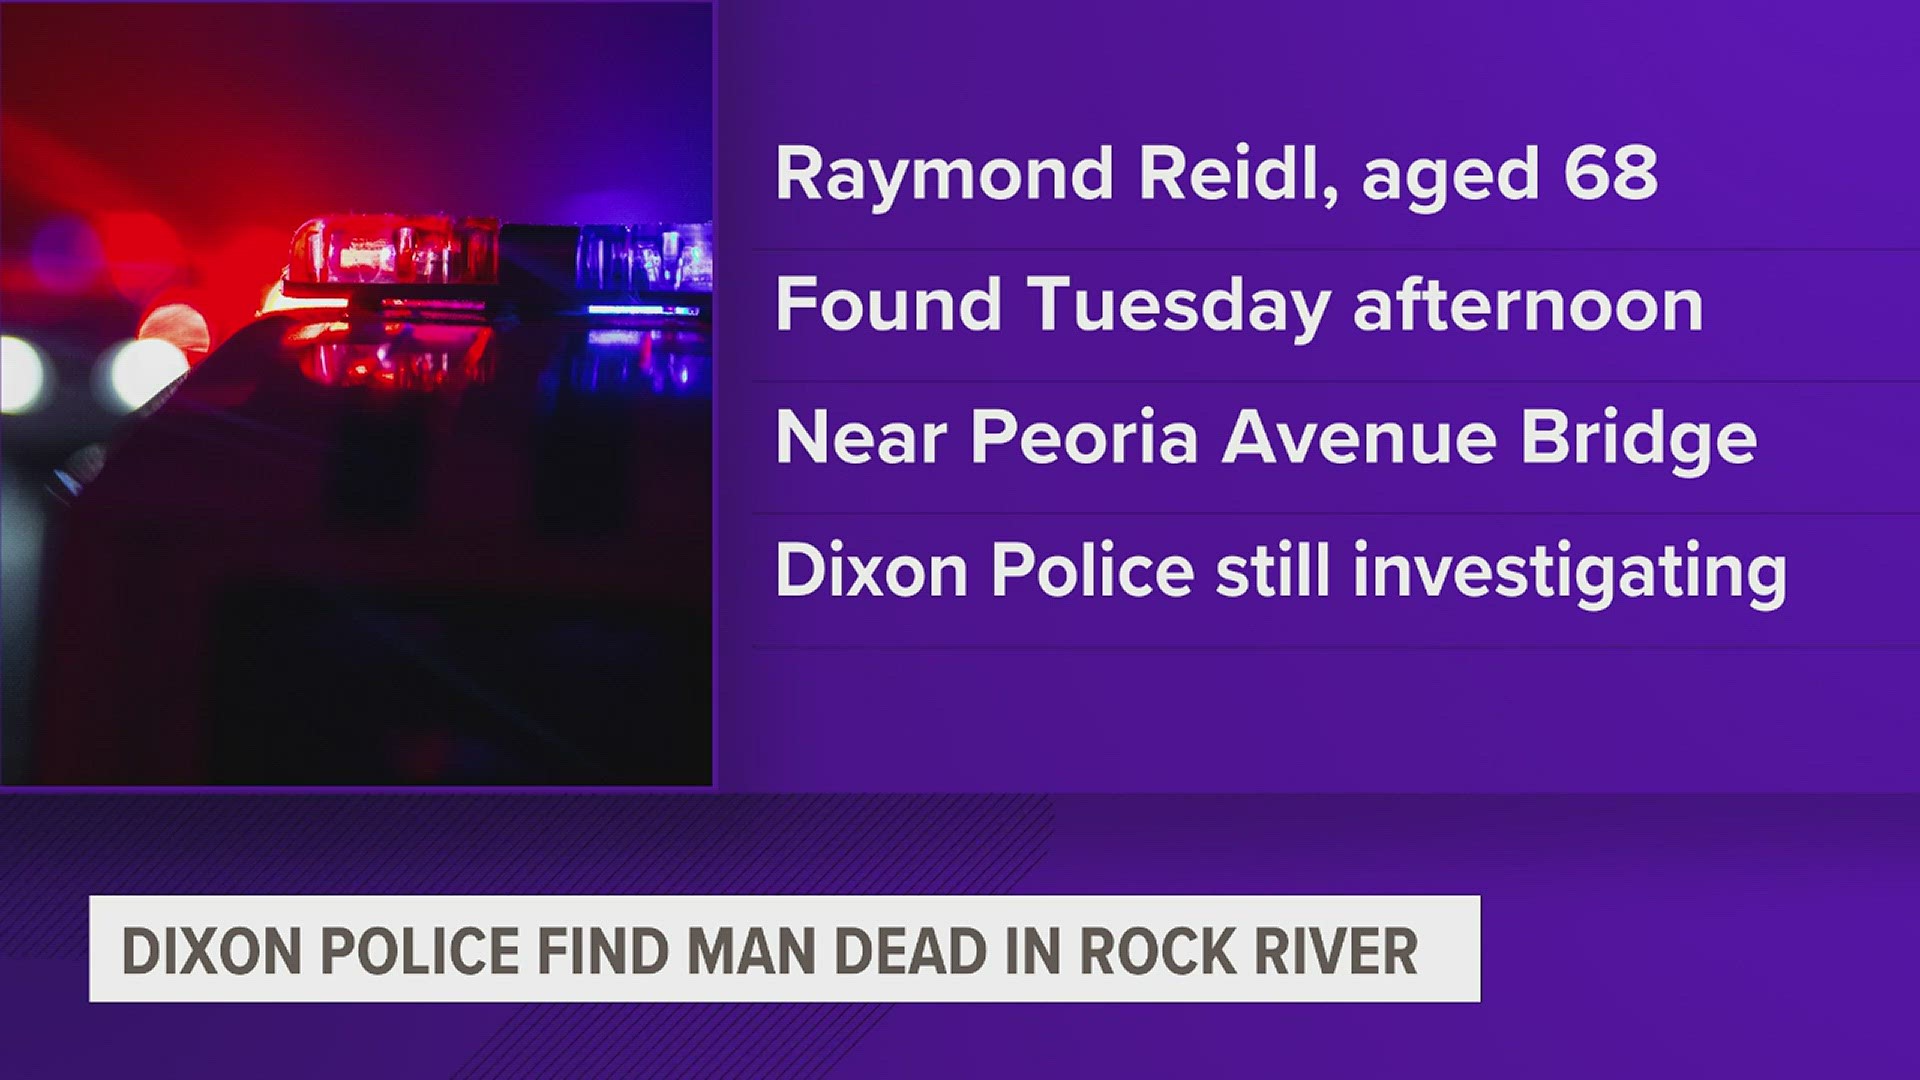 The man has been identified as Raymond Reidl, 68, of Dixon. Police are still investigating what happened.